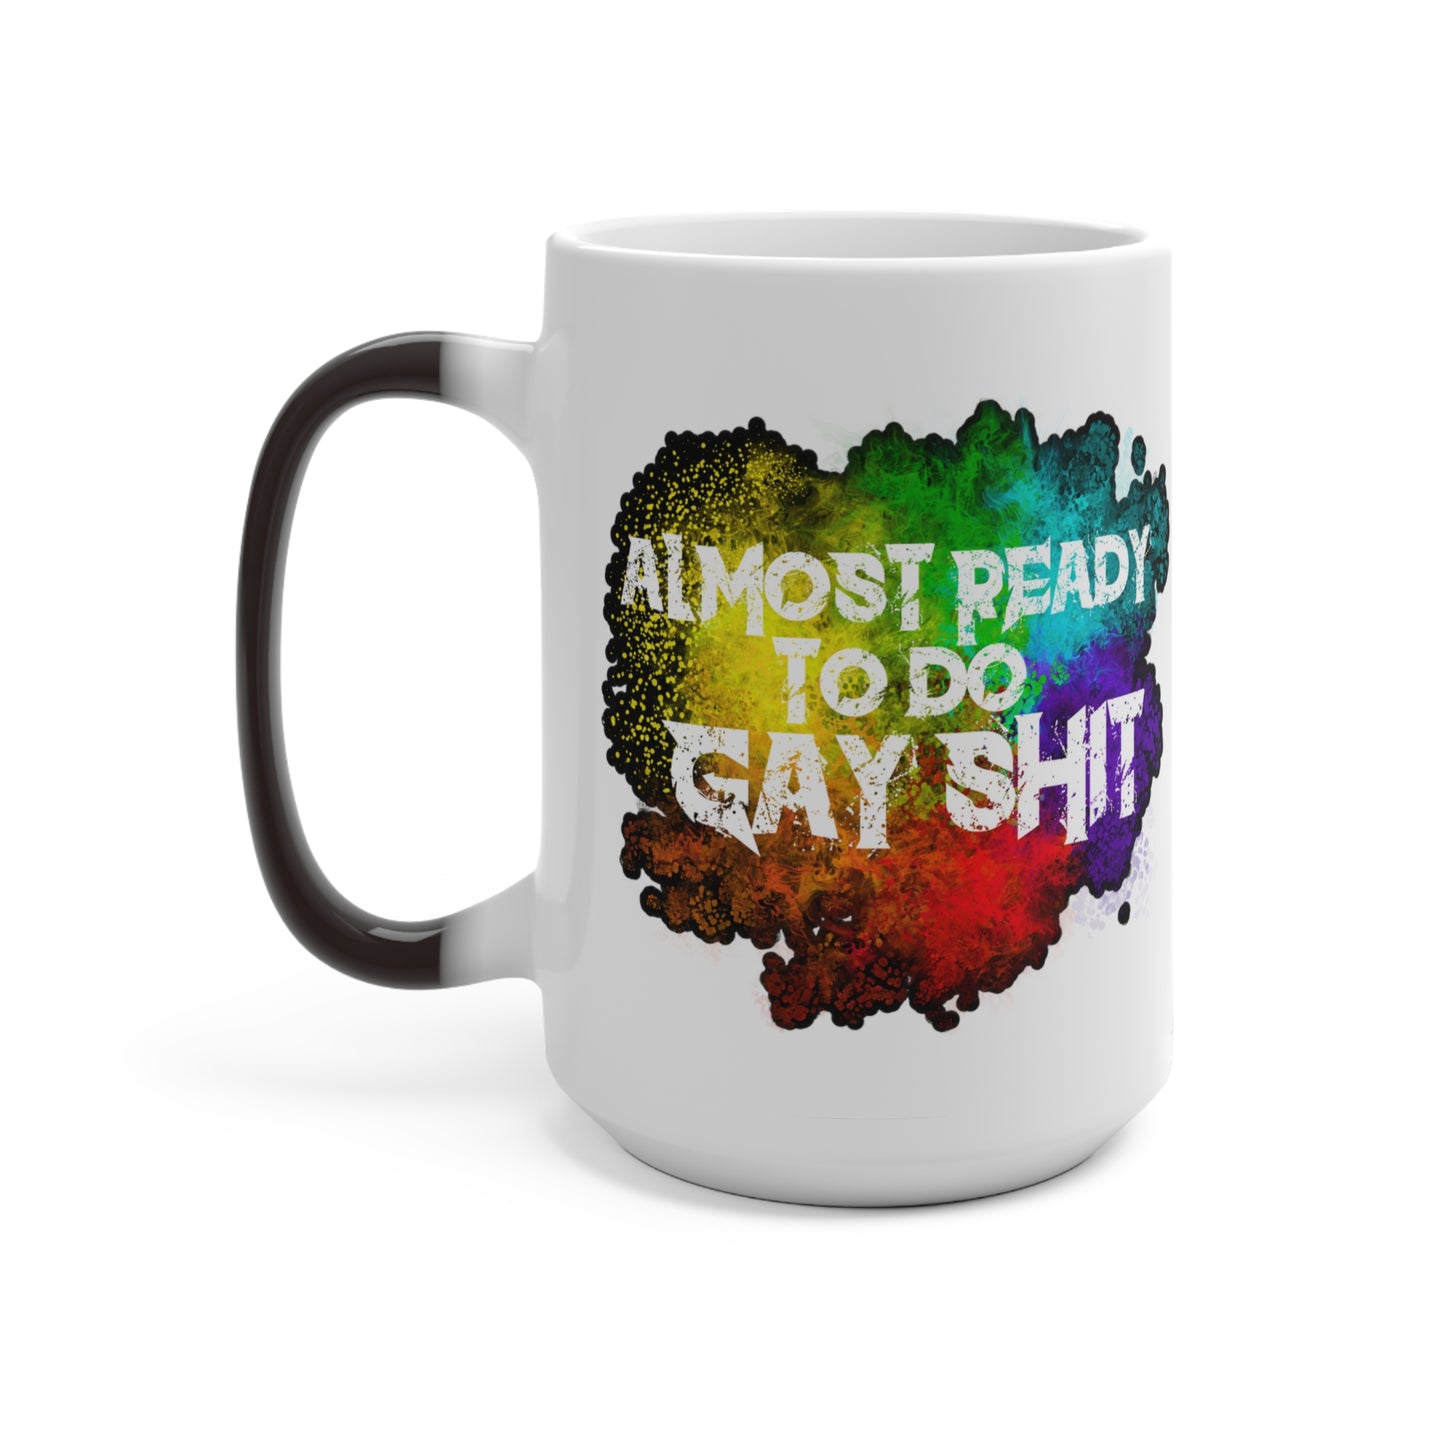 Unveil the 'Almost Ready To Do Gay Shit' 11oz color-changing mug by Moody Booty Apparel. A must-have LGBTQ pride-themed coffee mug that dynamically changes colors when hot liquid is added. Join the pride movement with this unique piece.